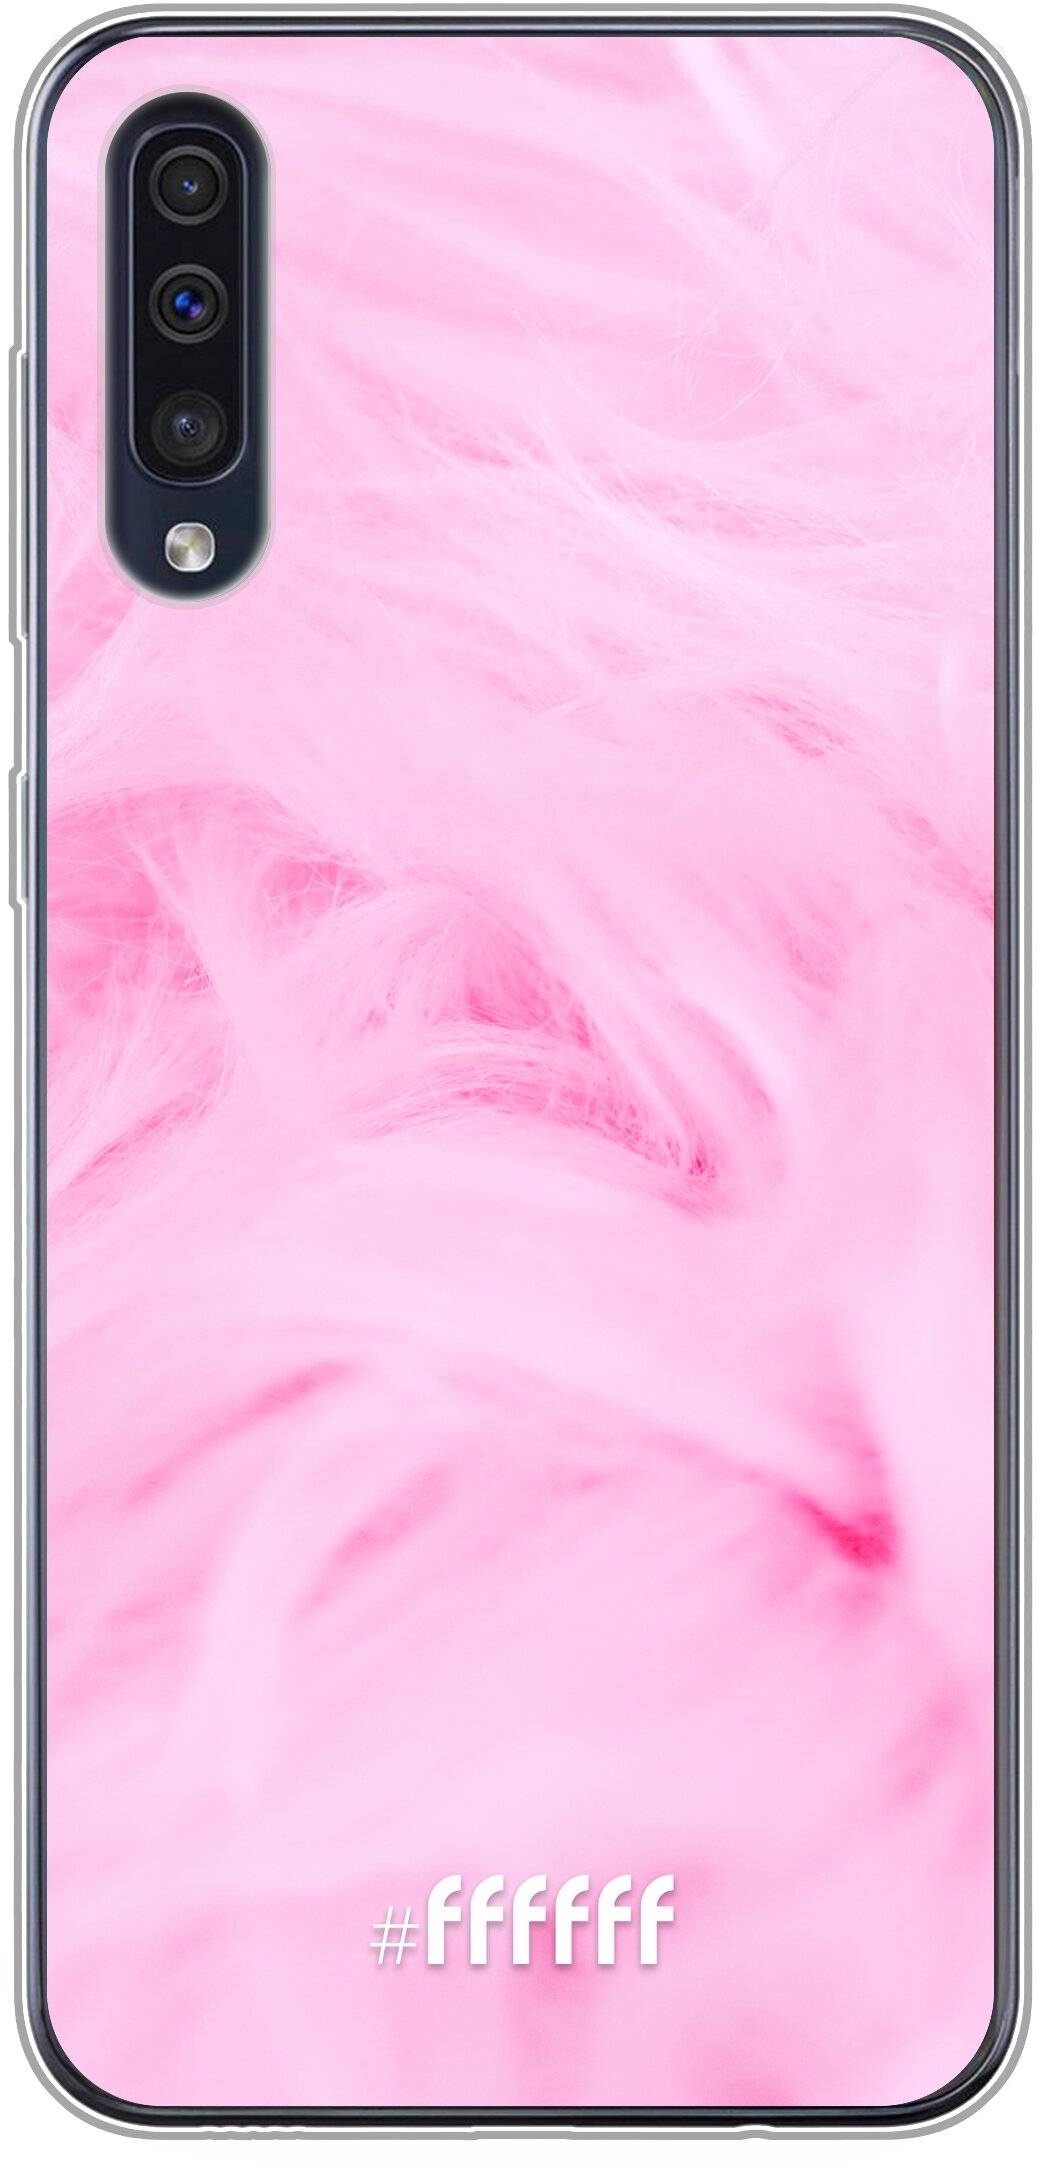 Cotton Candy Galaxy A30s